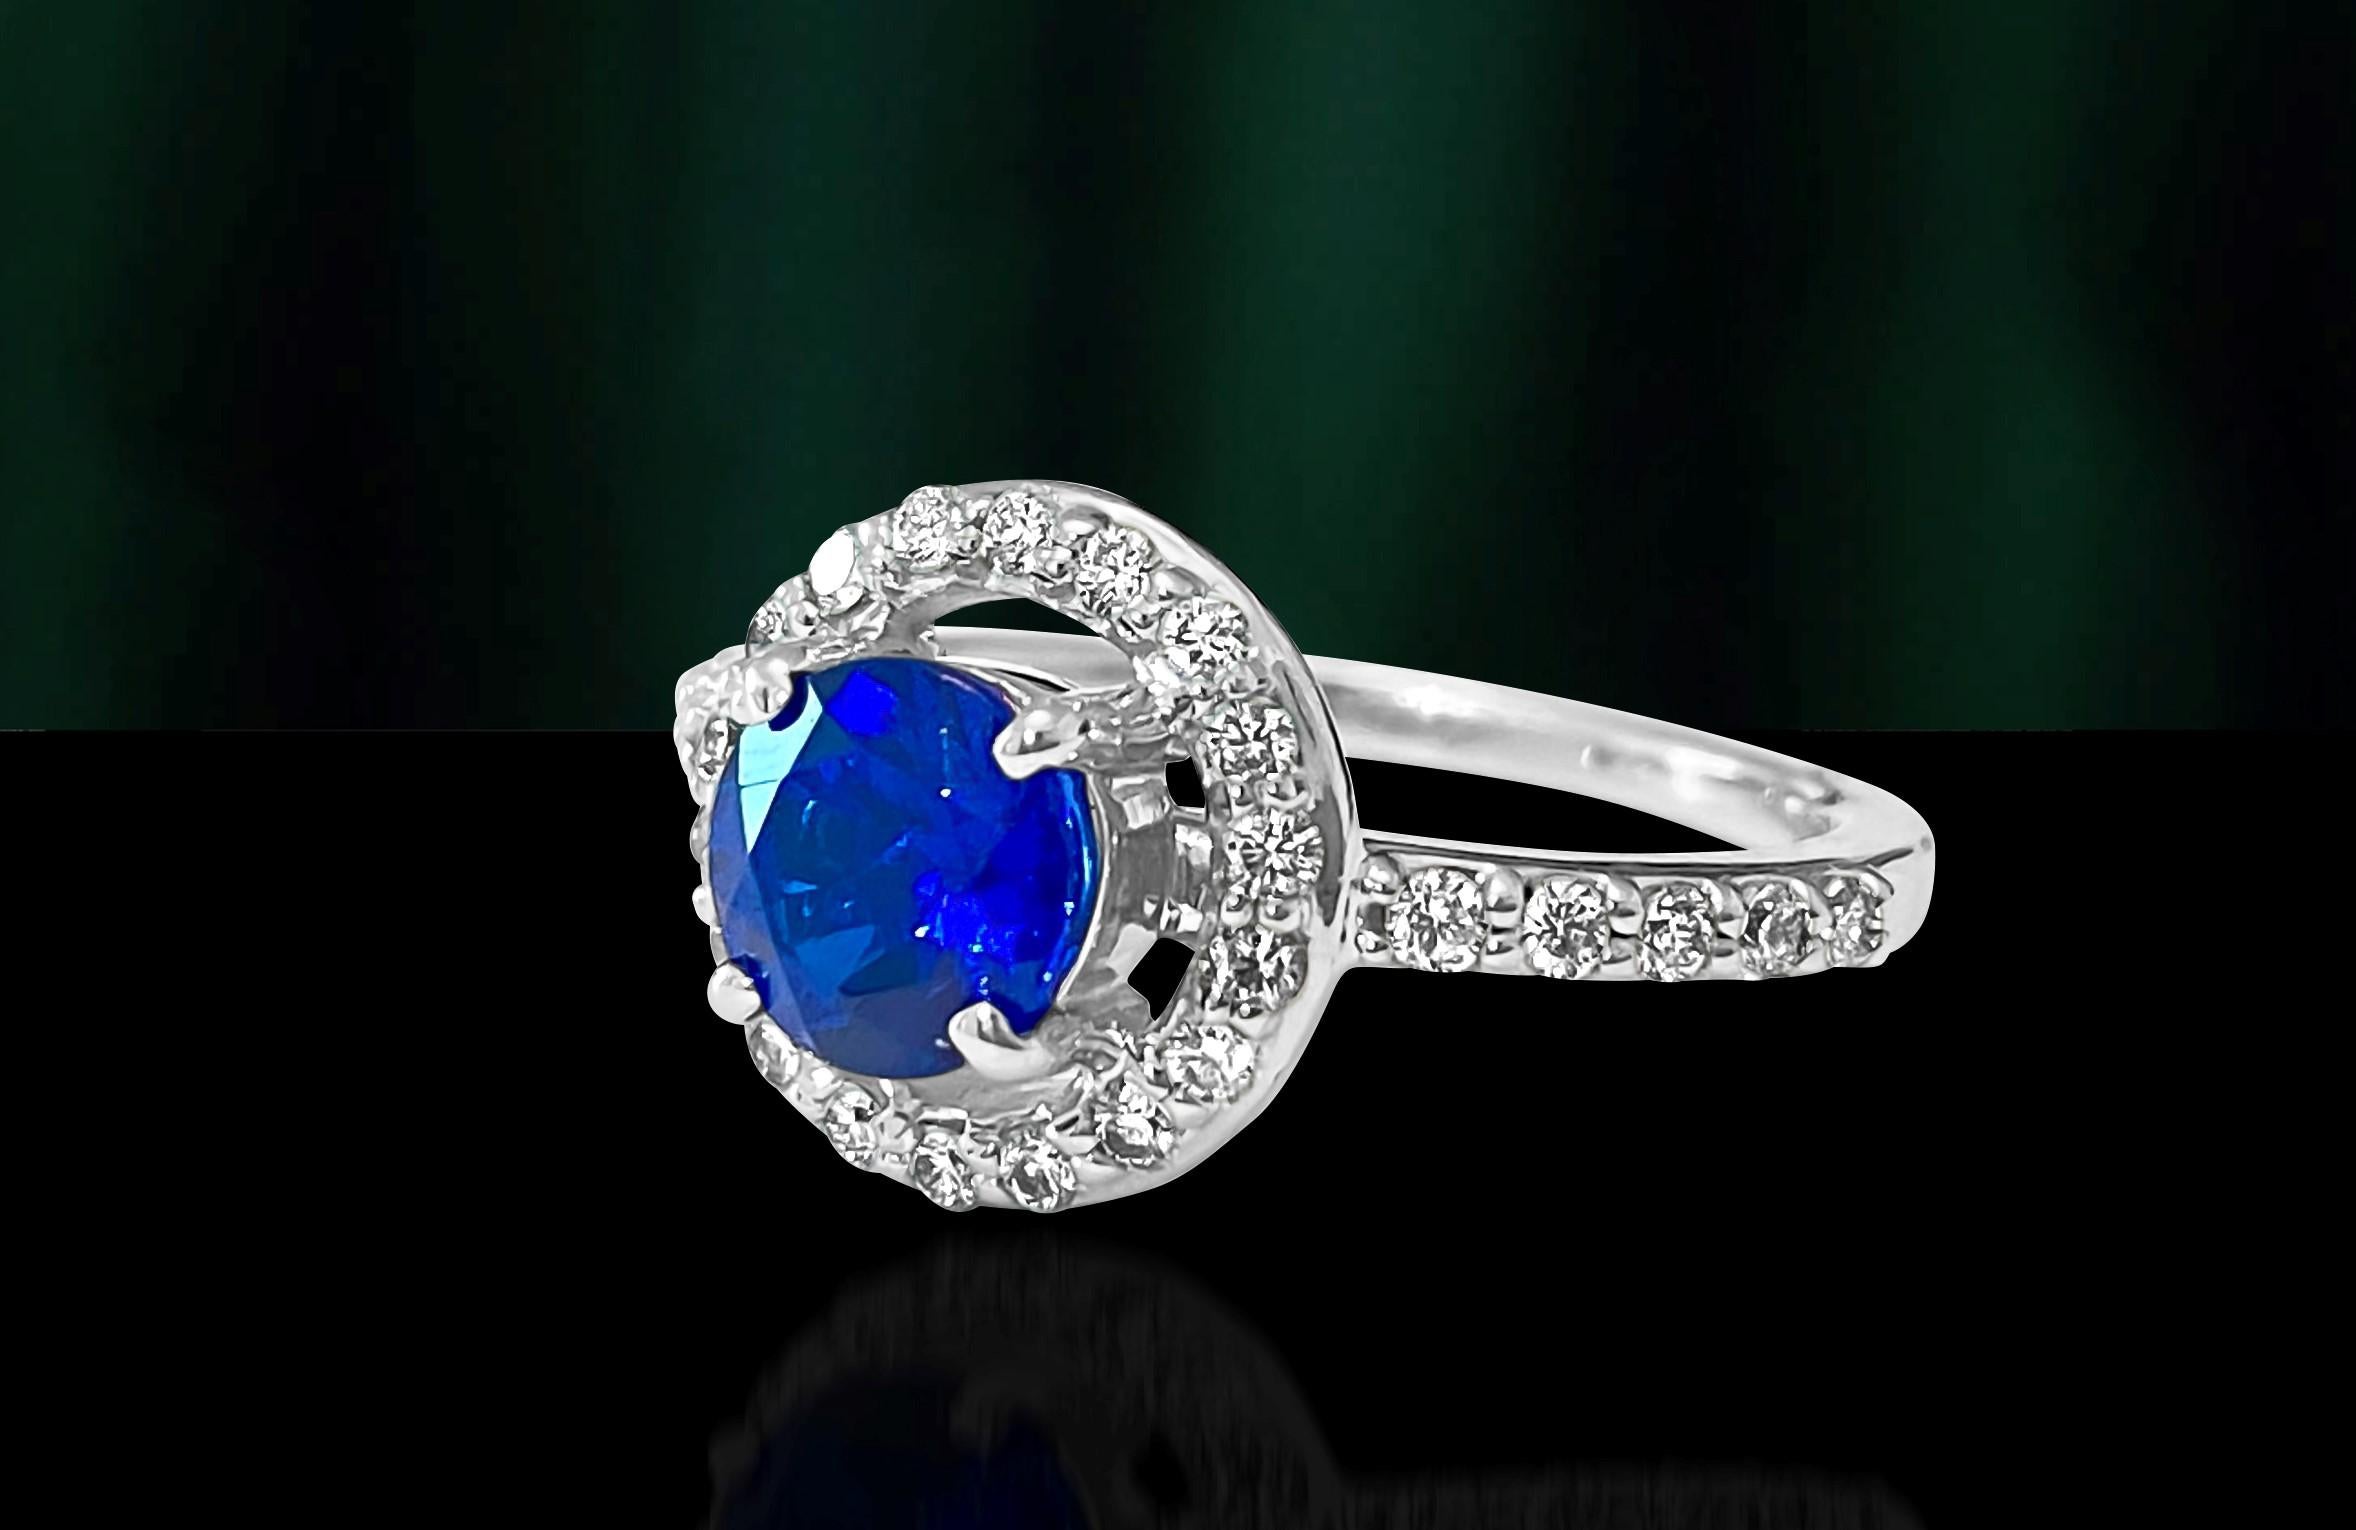 Metal: 14k white gold. 
Diamonds: 0.65 carats total. VS-SI clarity. F-G color. 100% natural earth mined round brilliant cut diamonds. 
Blue sapphire: 5.90 mm. 0.80 carat. Round cut. Sync blue sapphire set in prongs. 
 Total weight of the ring: 3.44